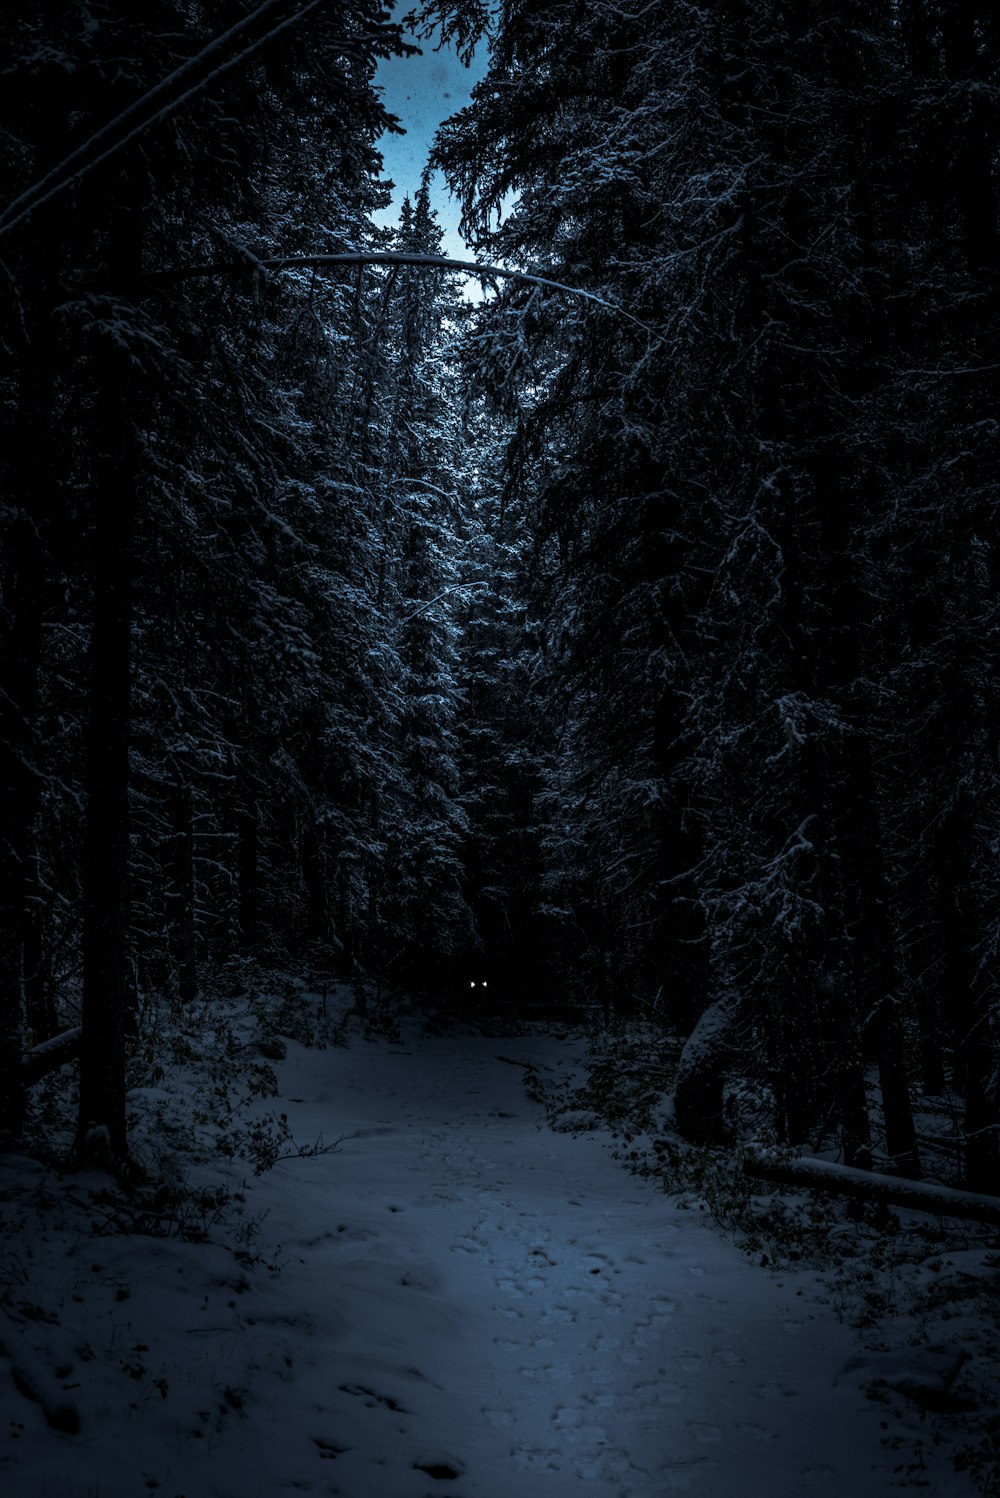 1500+ Night Forest Pictures | Download Free Images on Unsplash